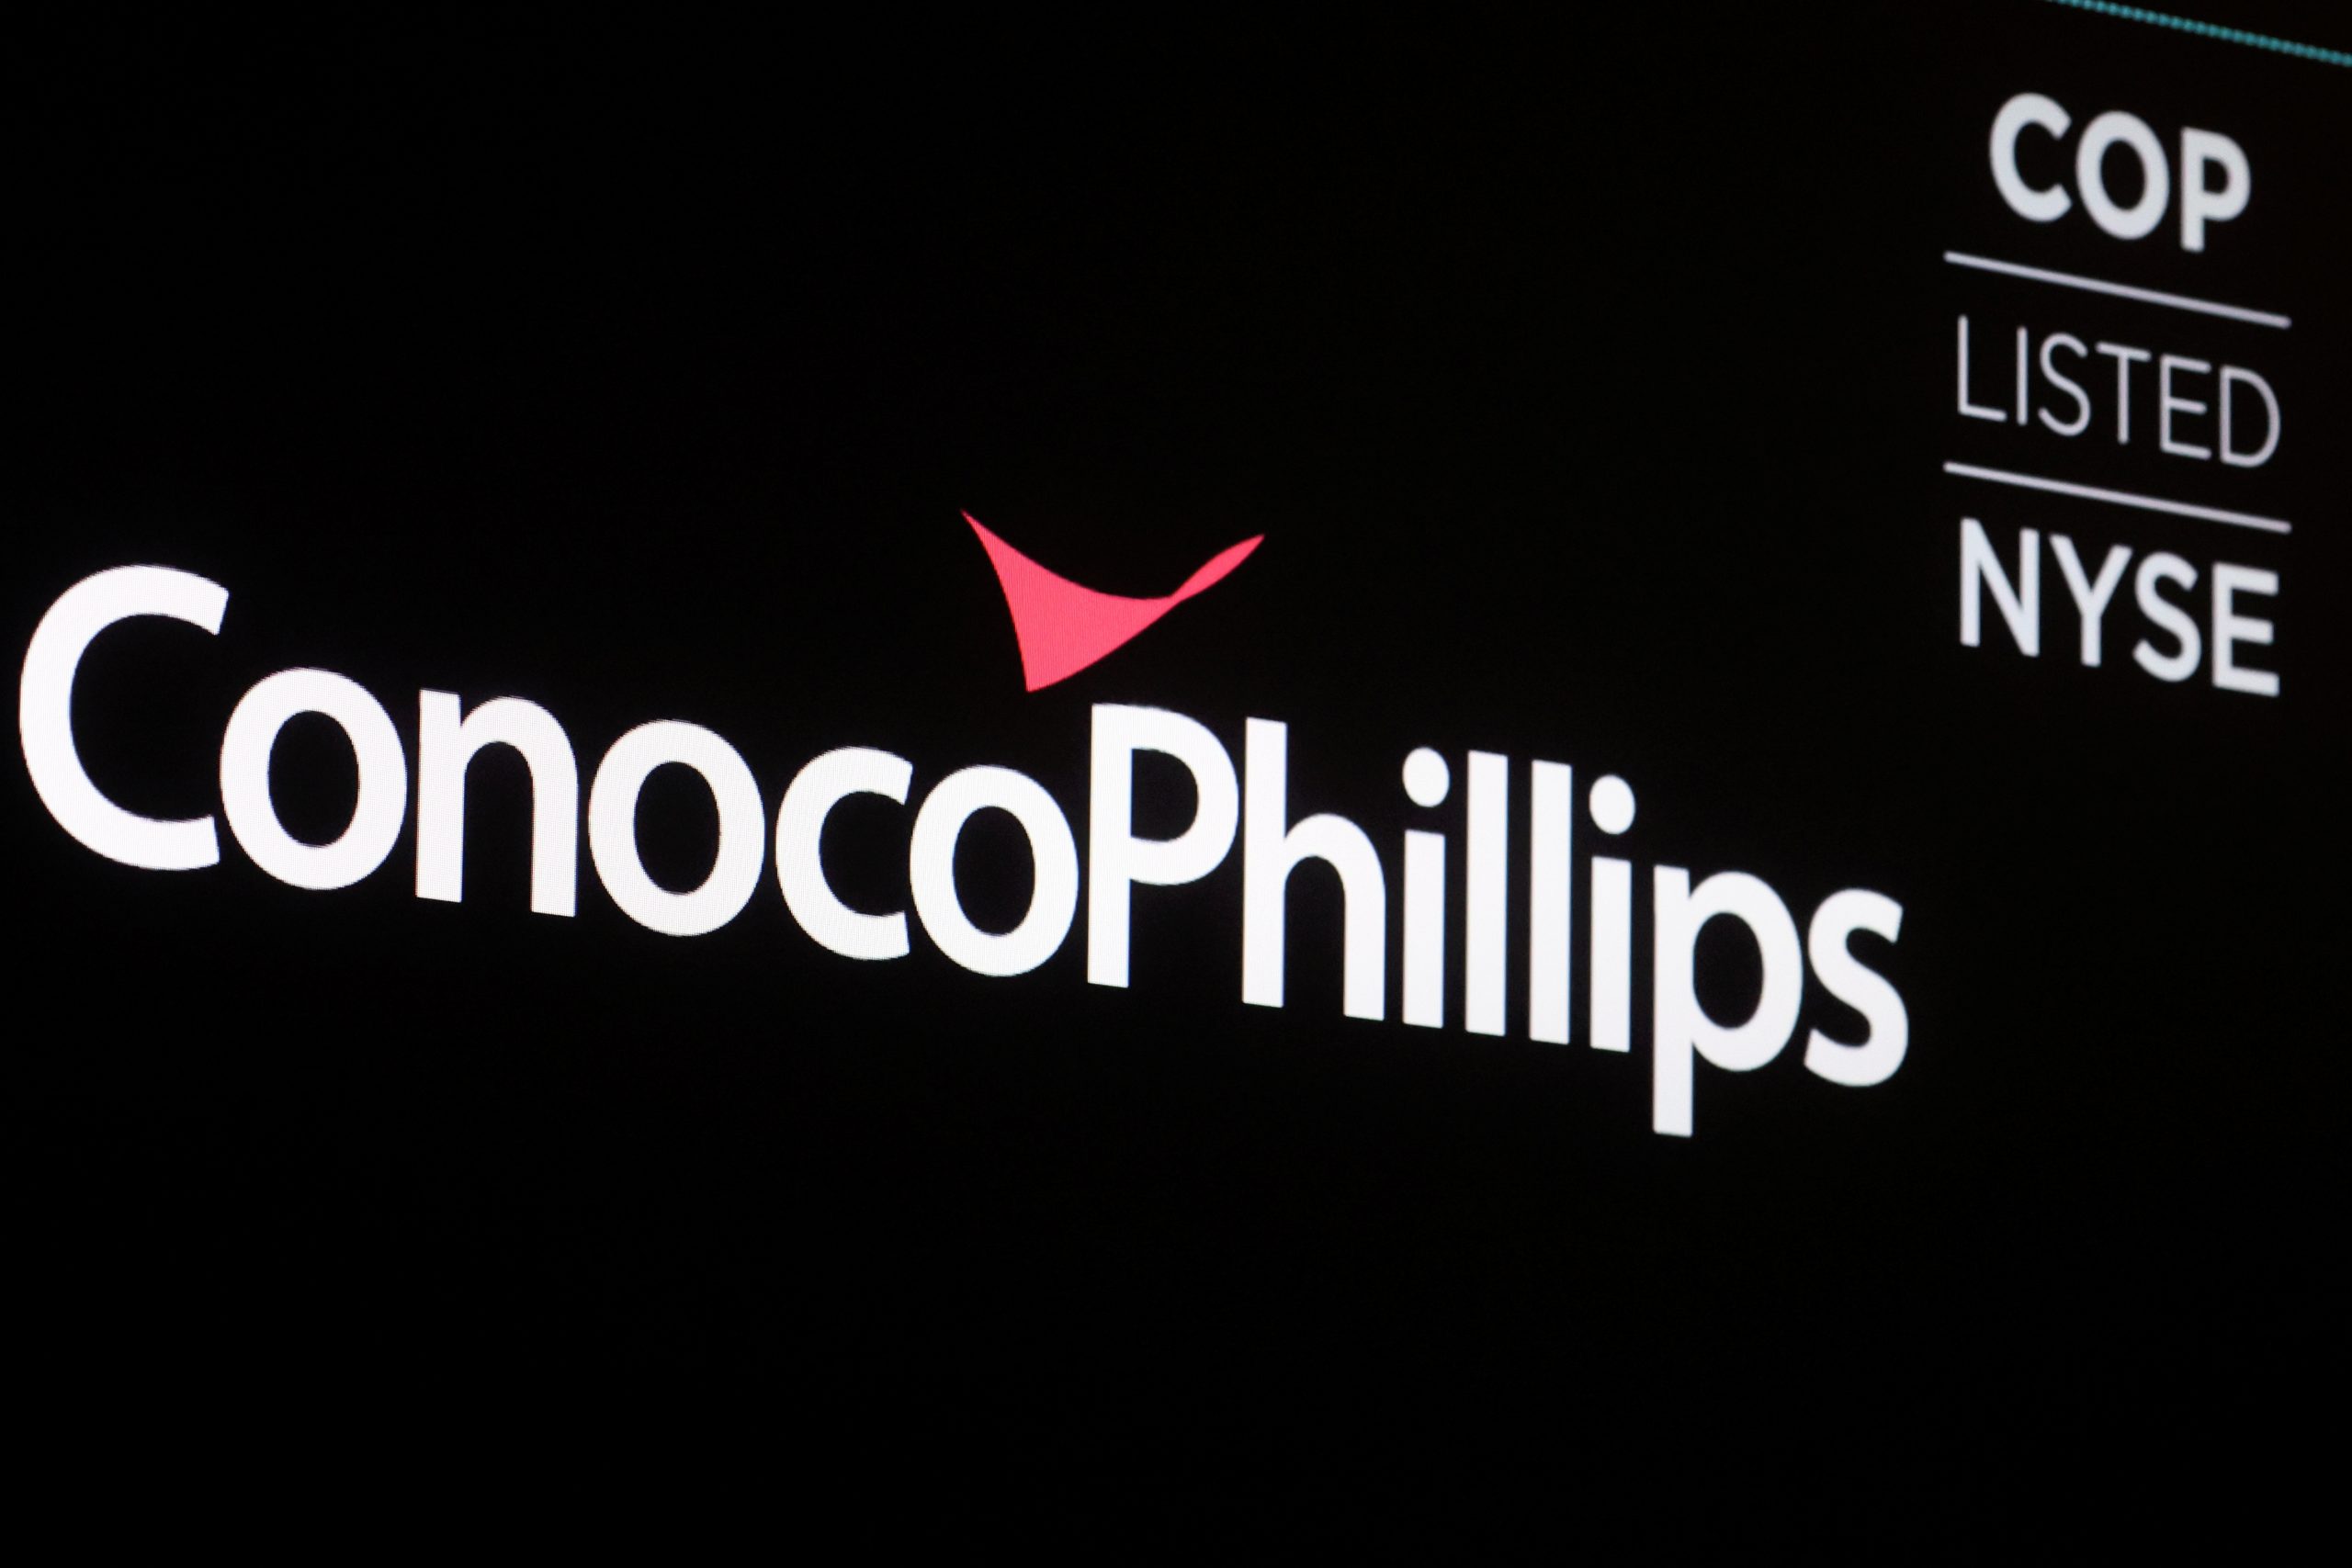 ConocoPhillips to move forward with development of Willow project in Alaska